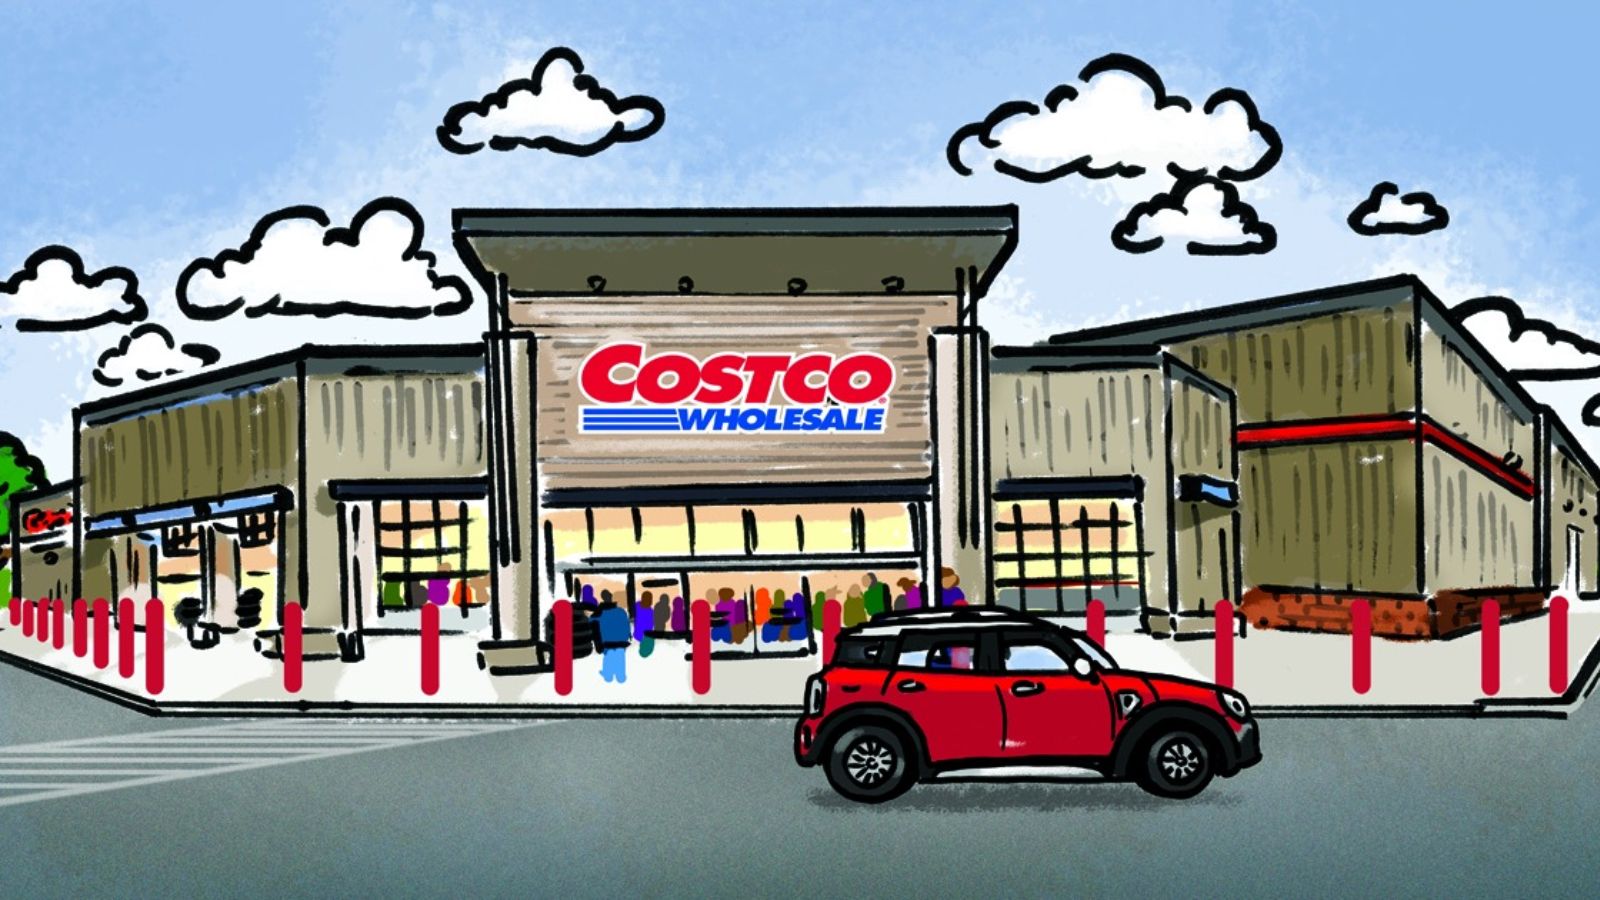 expired-costco-get-75-in-costco-cash-by-purchasing-500-online